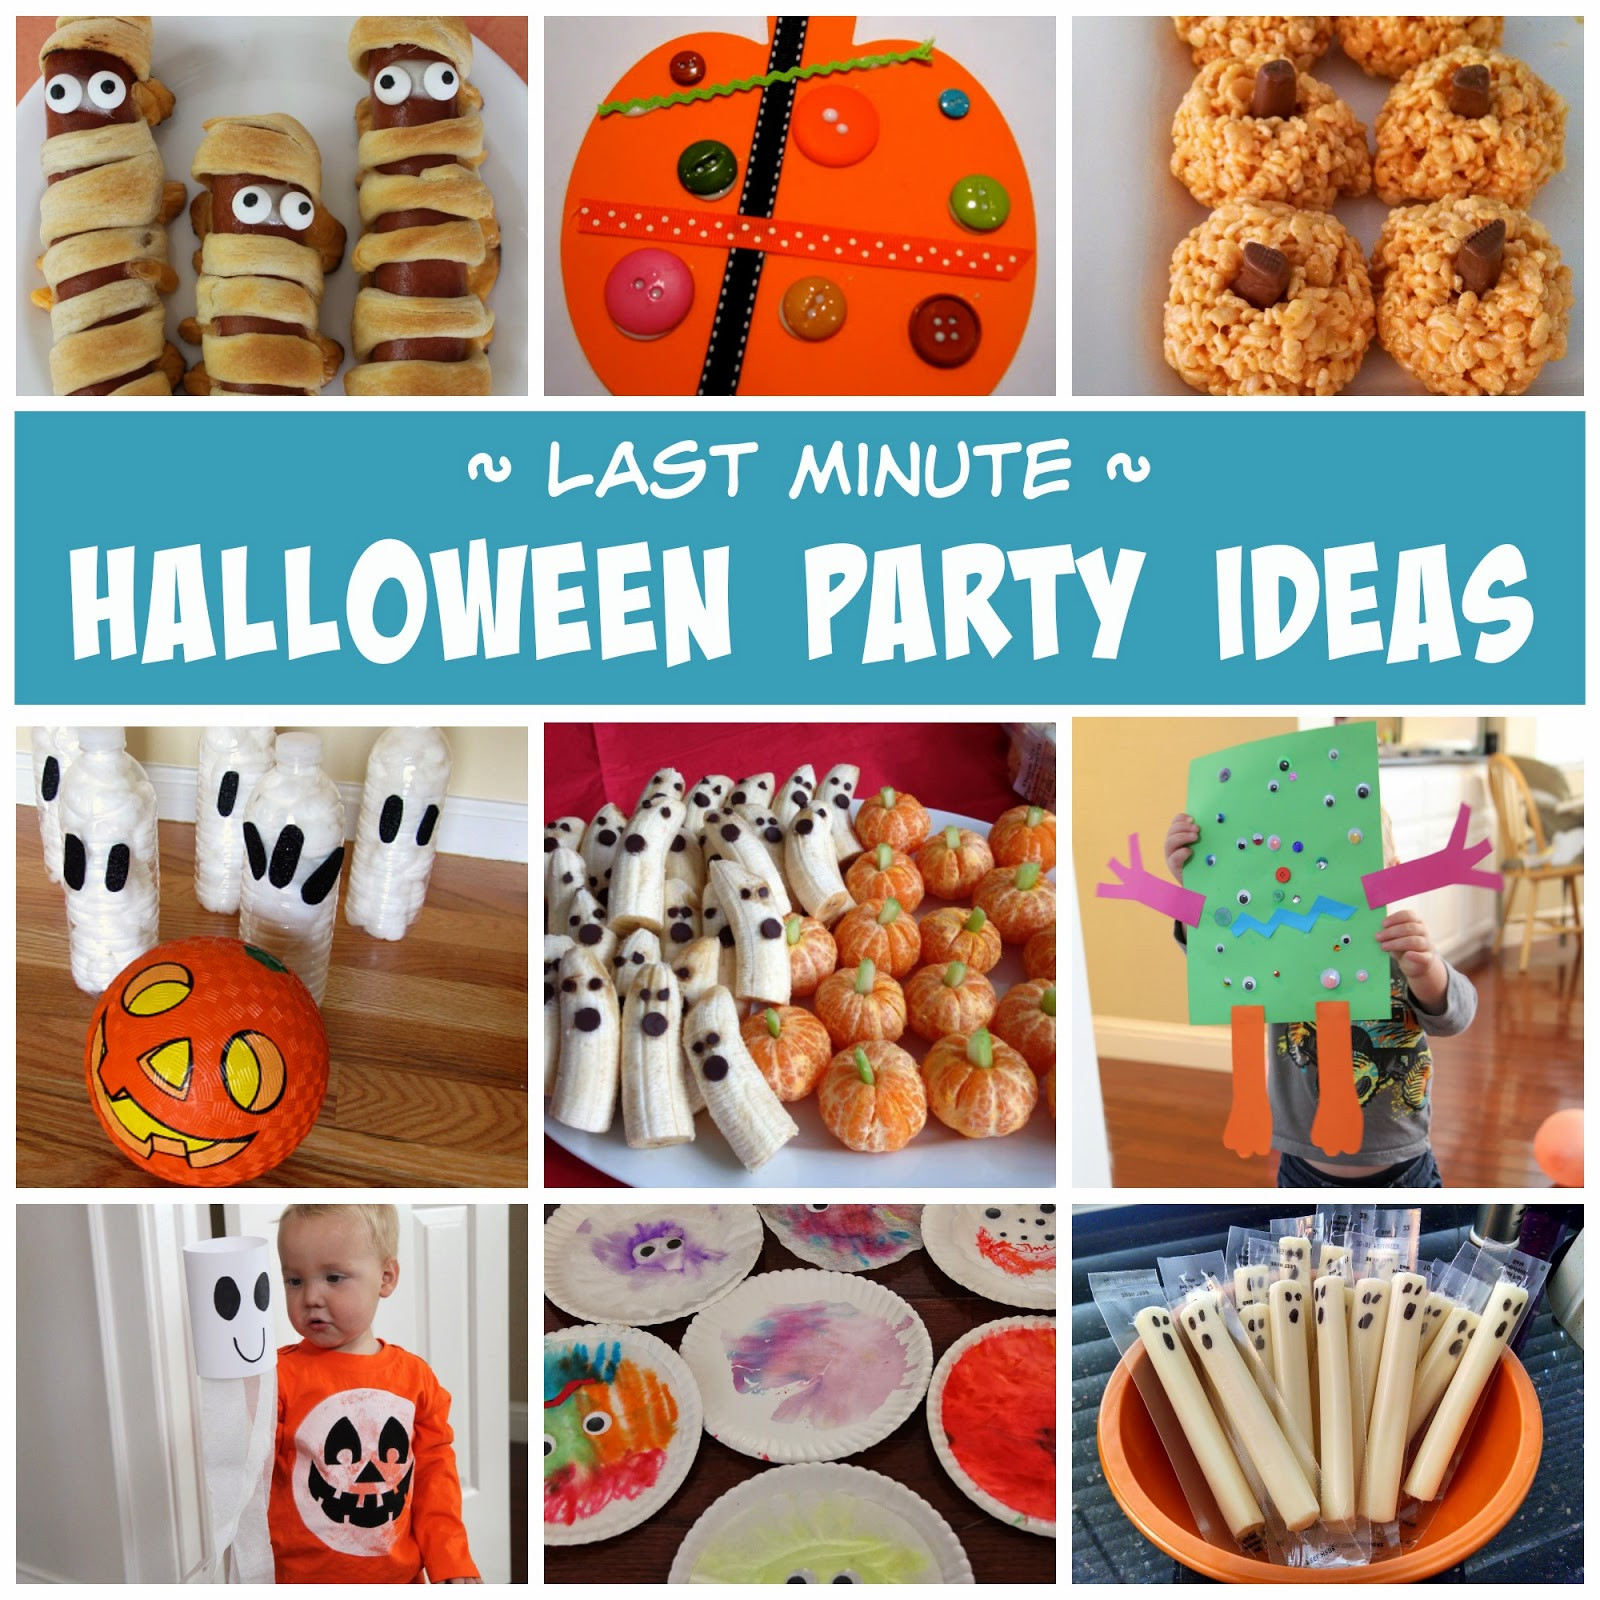 Fun Halloween Party Game Ideas For Kids
 Toddler Approved Last Minute Halloween Party Ideas